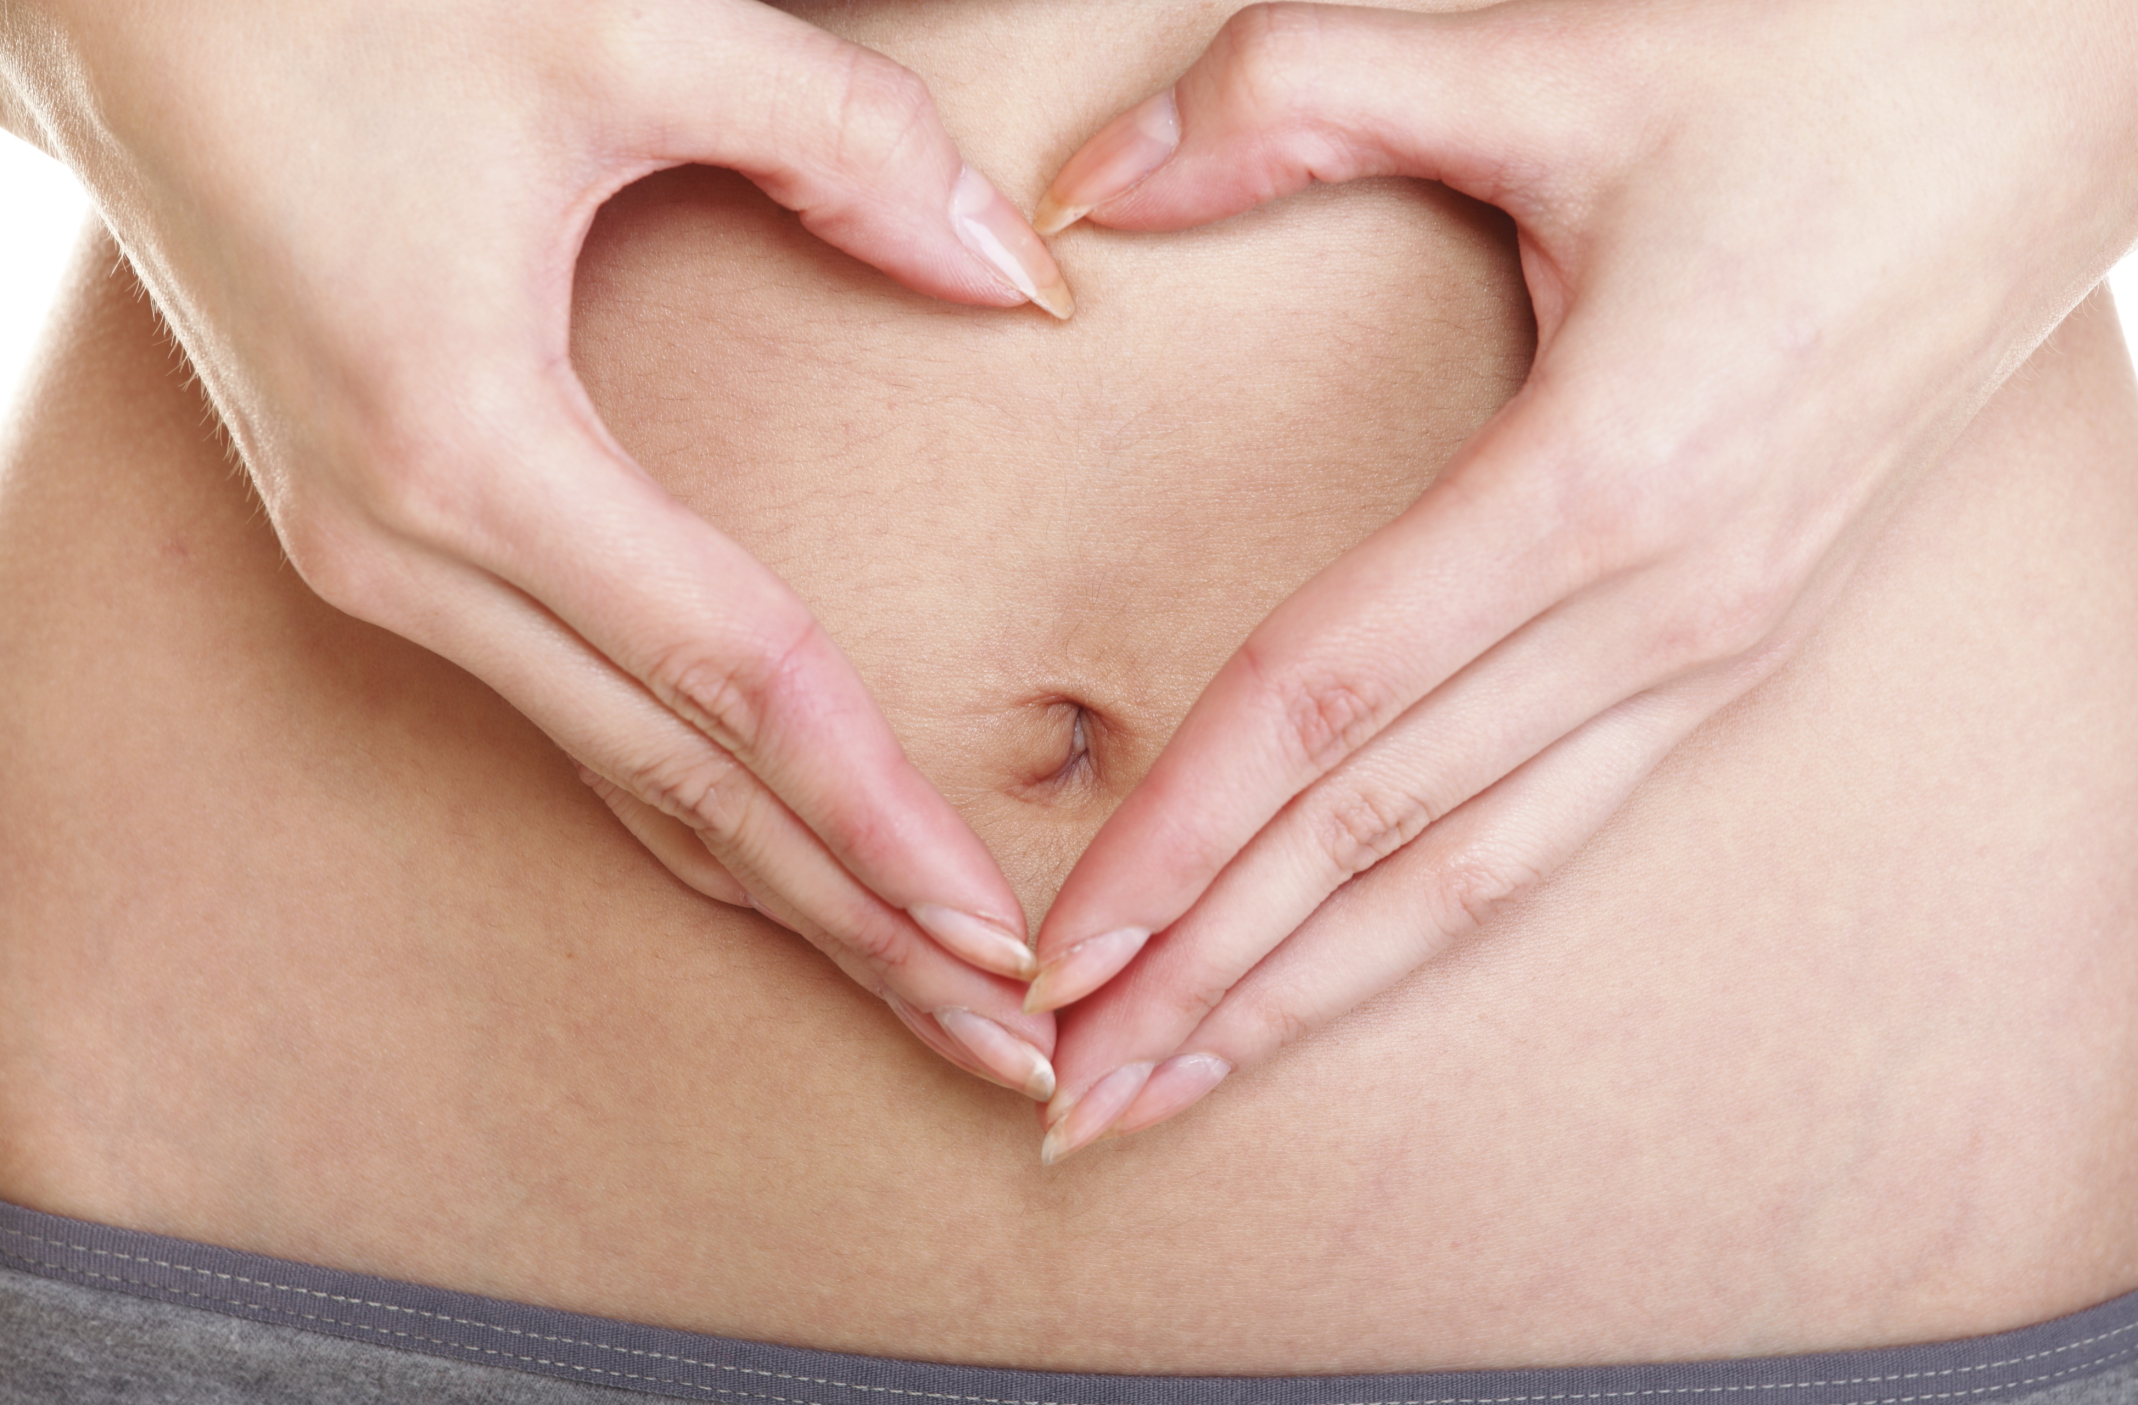 Pannus stomach (apron belly): Causes and how to reduce it